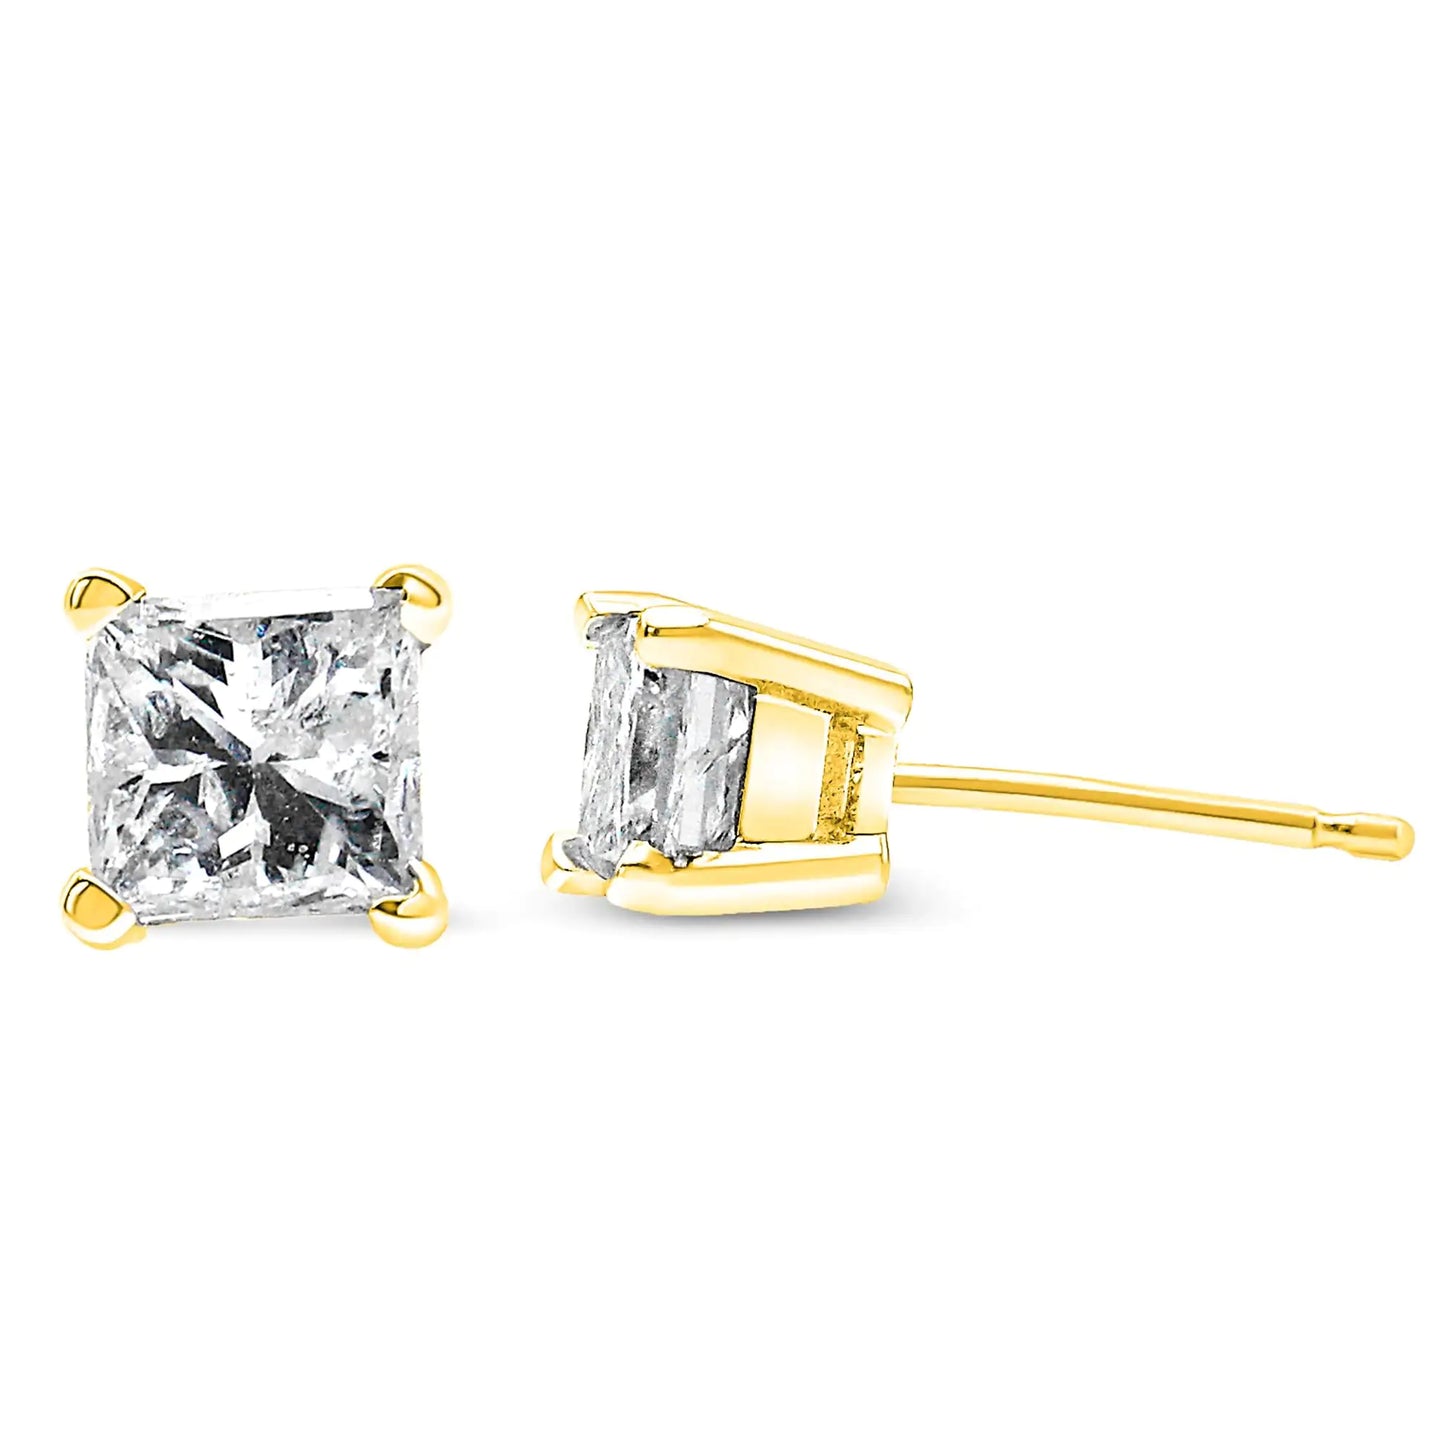 AGS Certified Princess-Cut Square Diamond 4-Prong Solitaire Stud Earrings in 14K Gold (H-I Color, I1-I2 Clarity)